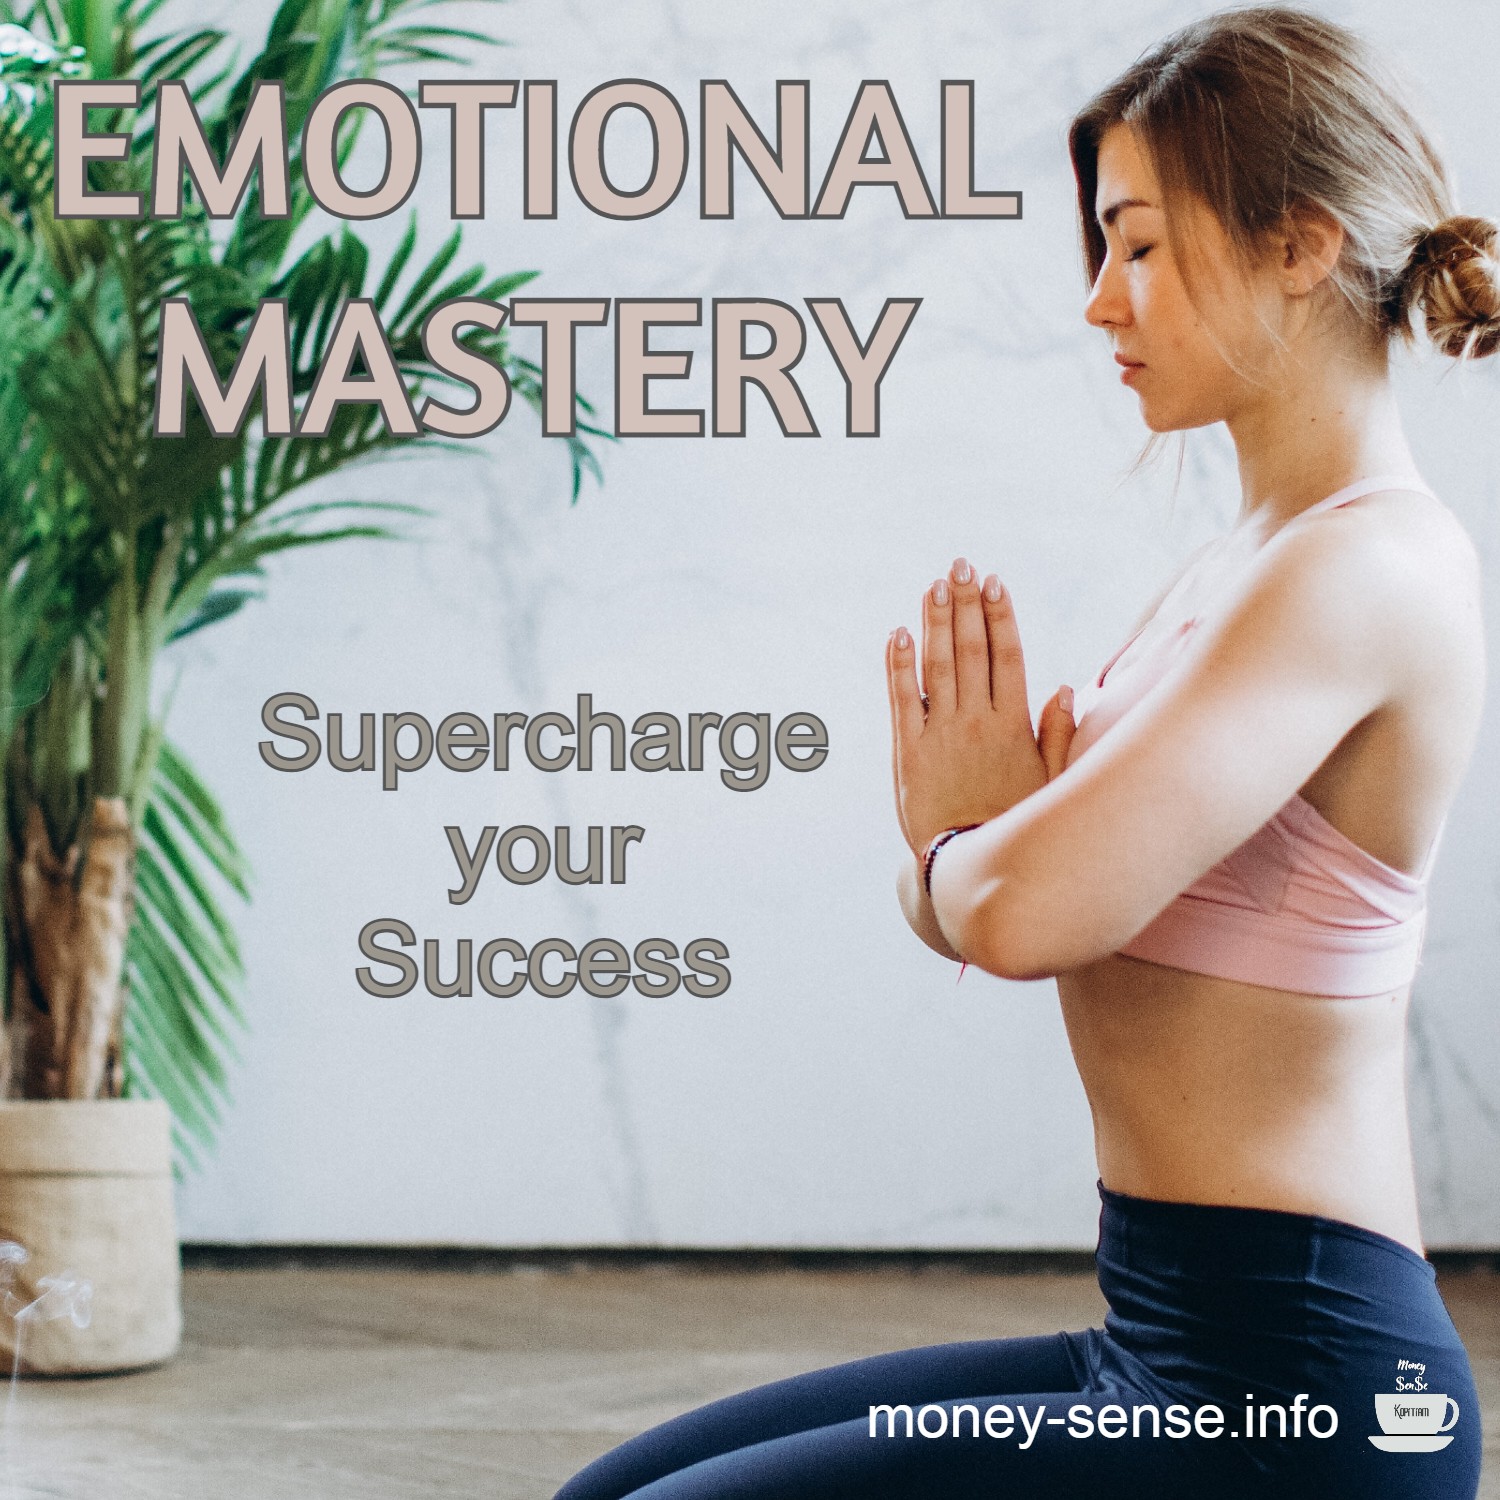 Emotional Mastery - Supercharge your Success